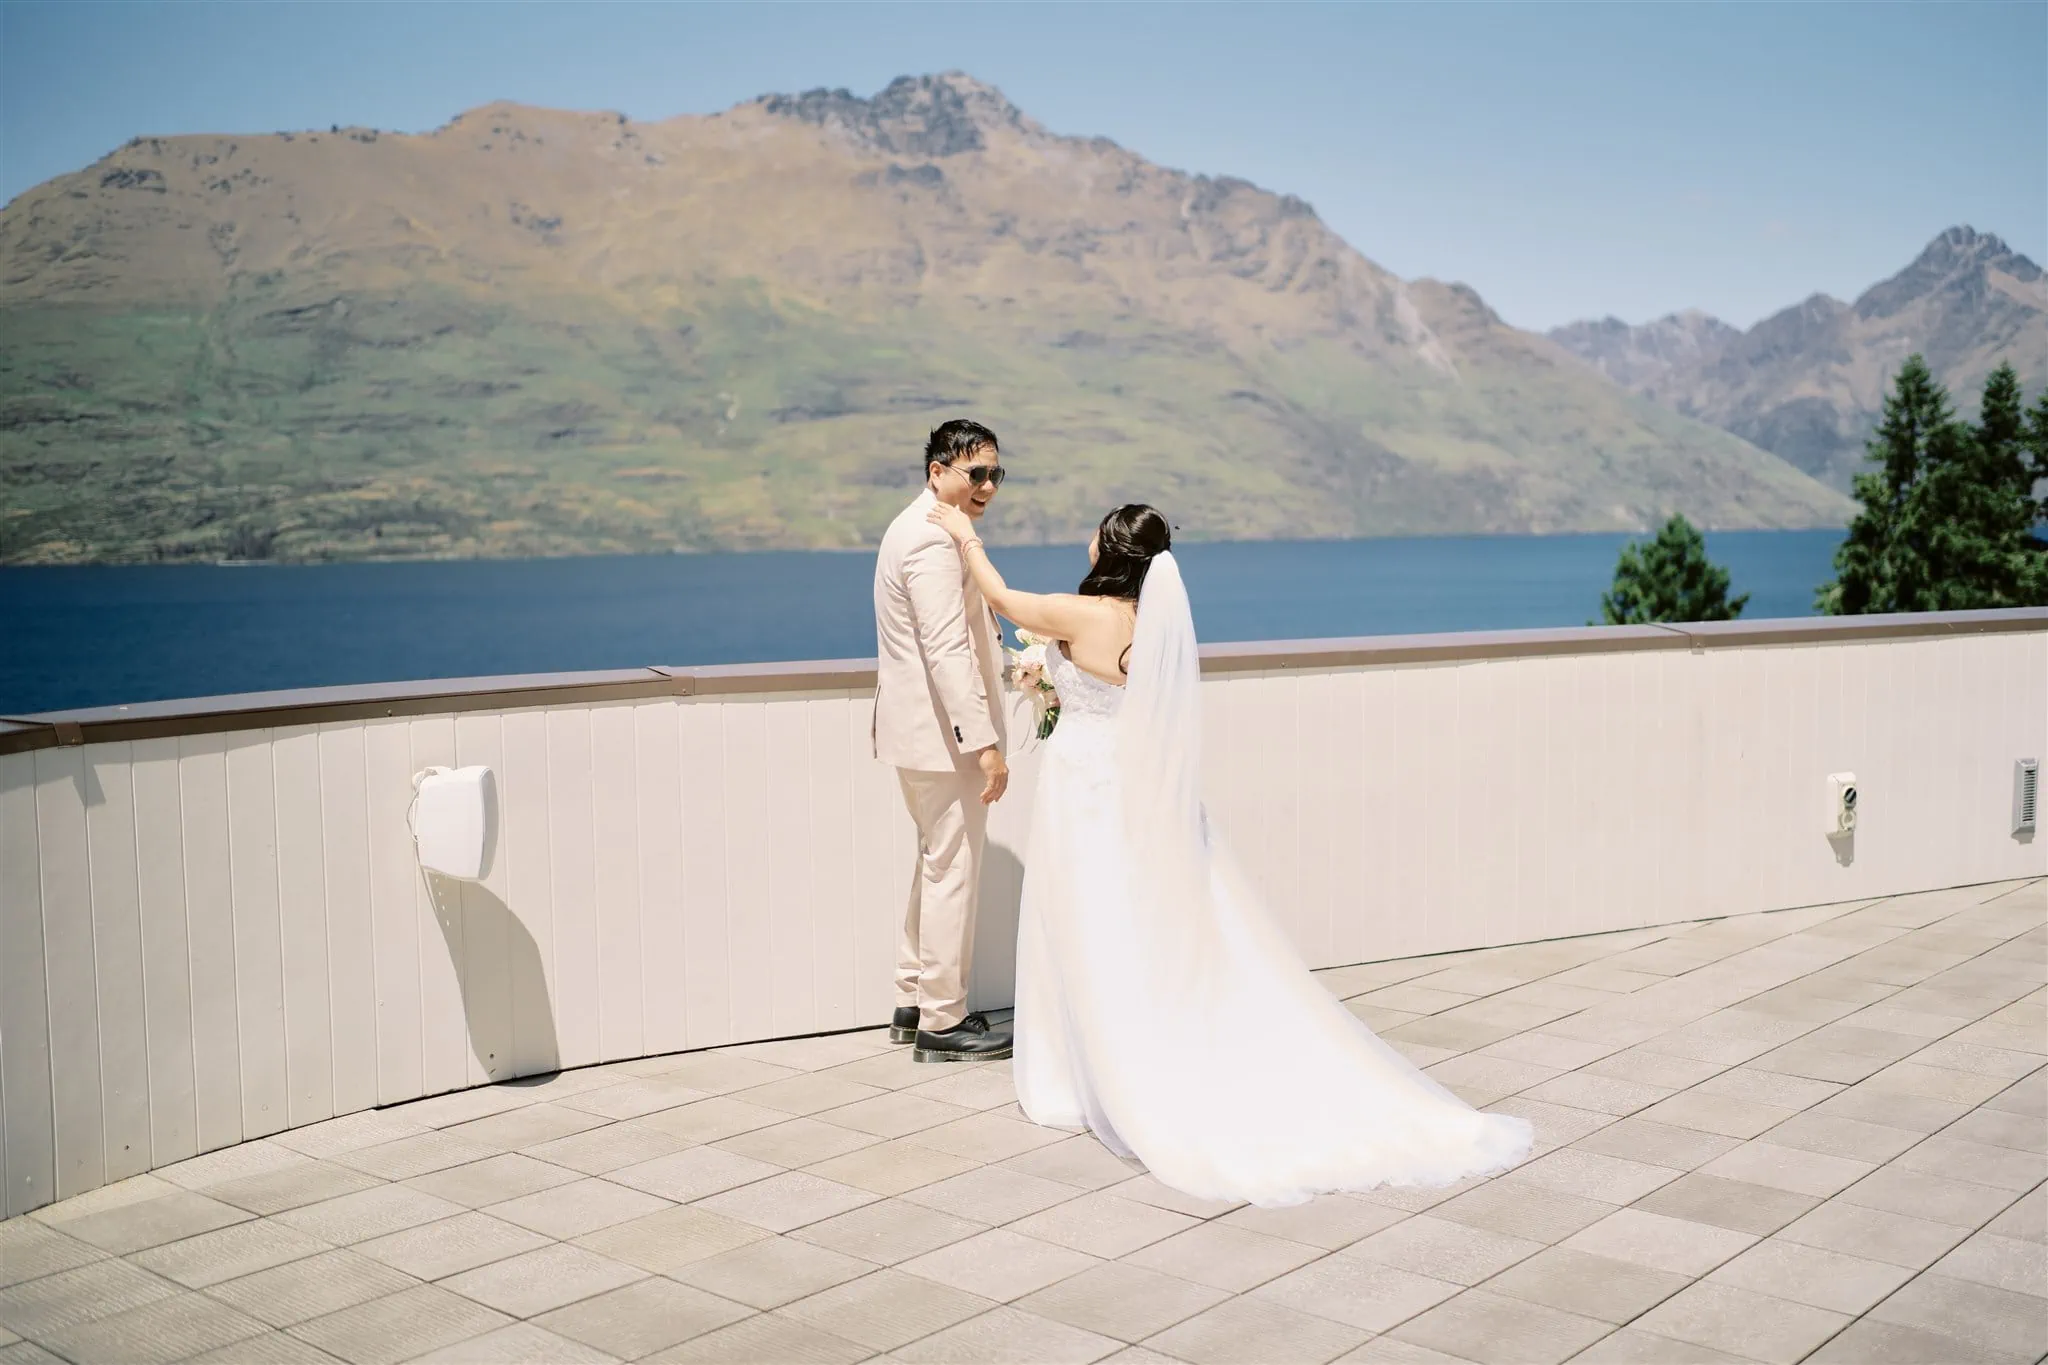 Queenstown Elopement Heli Wedding Photographer クイーンズタウン結婚式 | A man and woman embracing on a terrace in Queenstown with mountains in the background during their elopement ceremony.